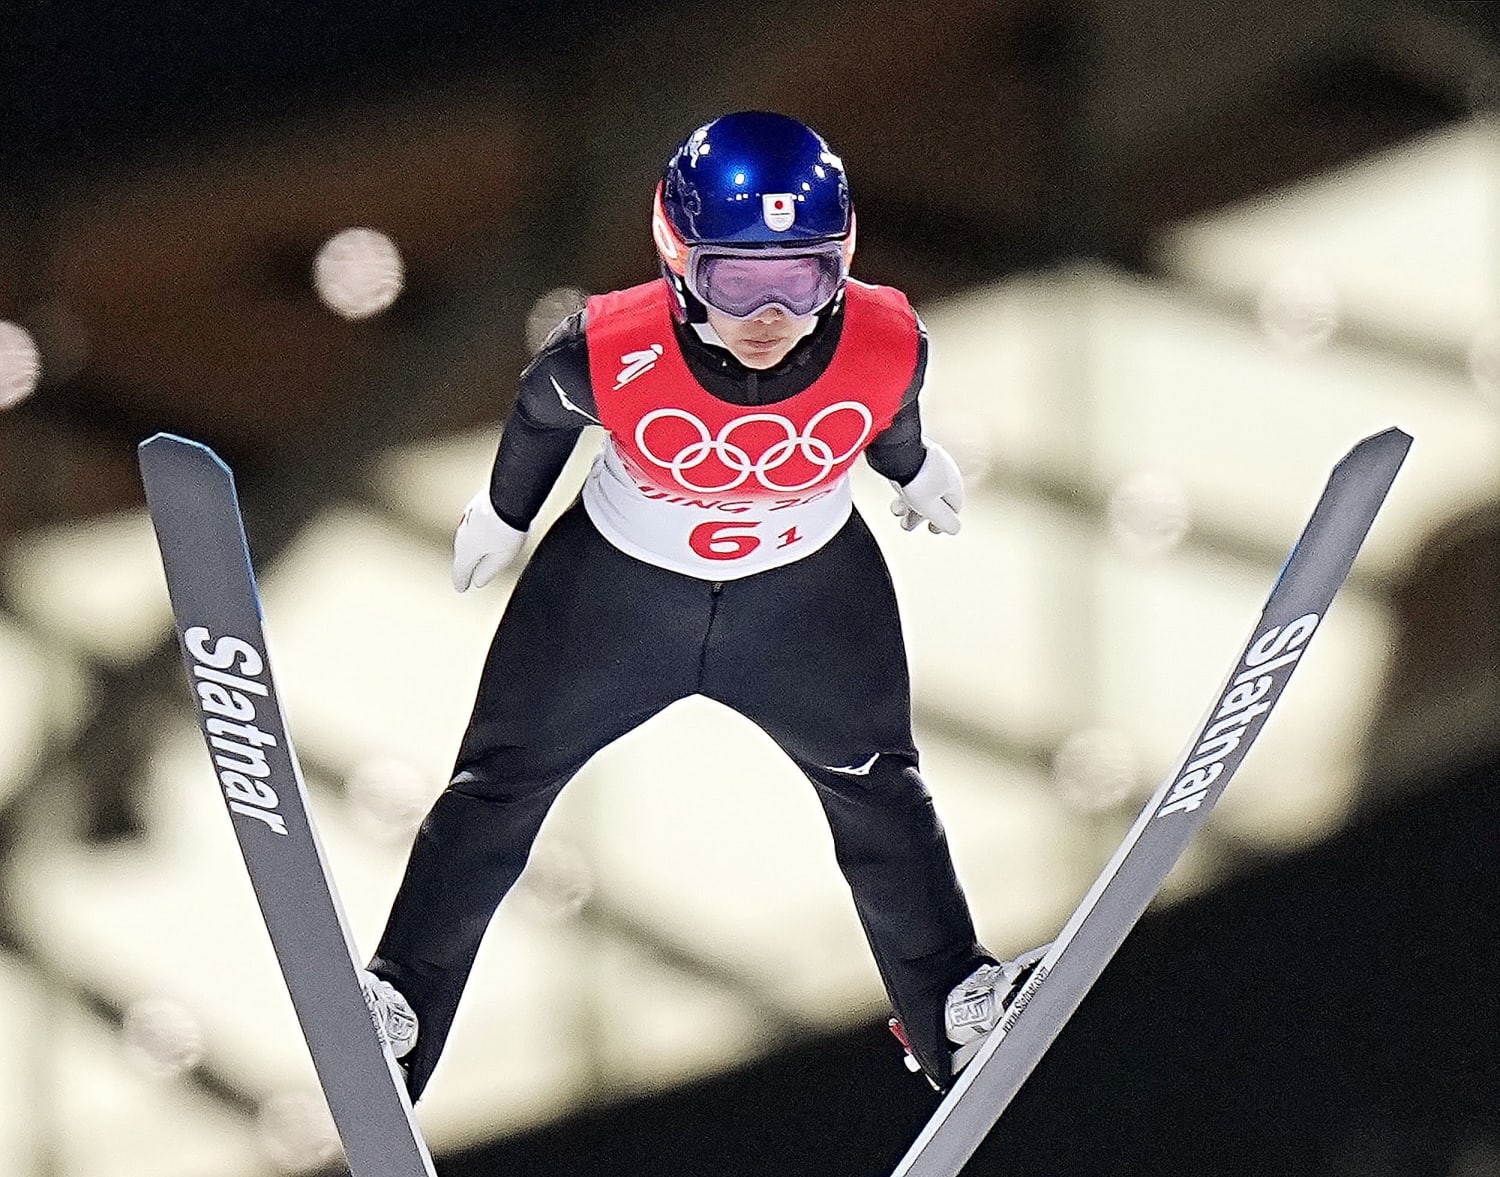 Five athletes disqualified from mixed team ski jumping event over suits